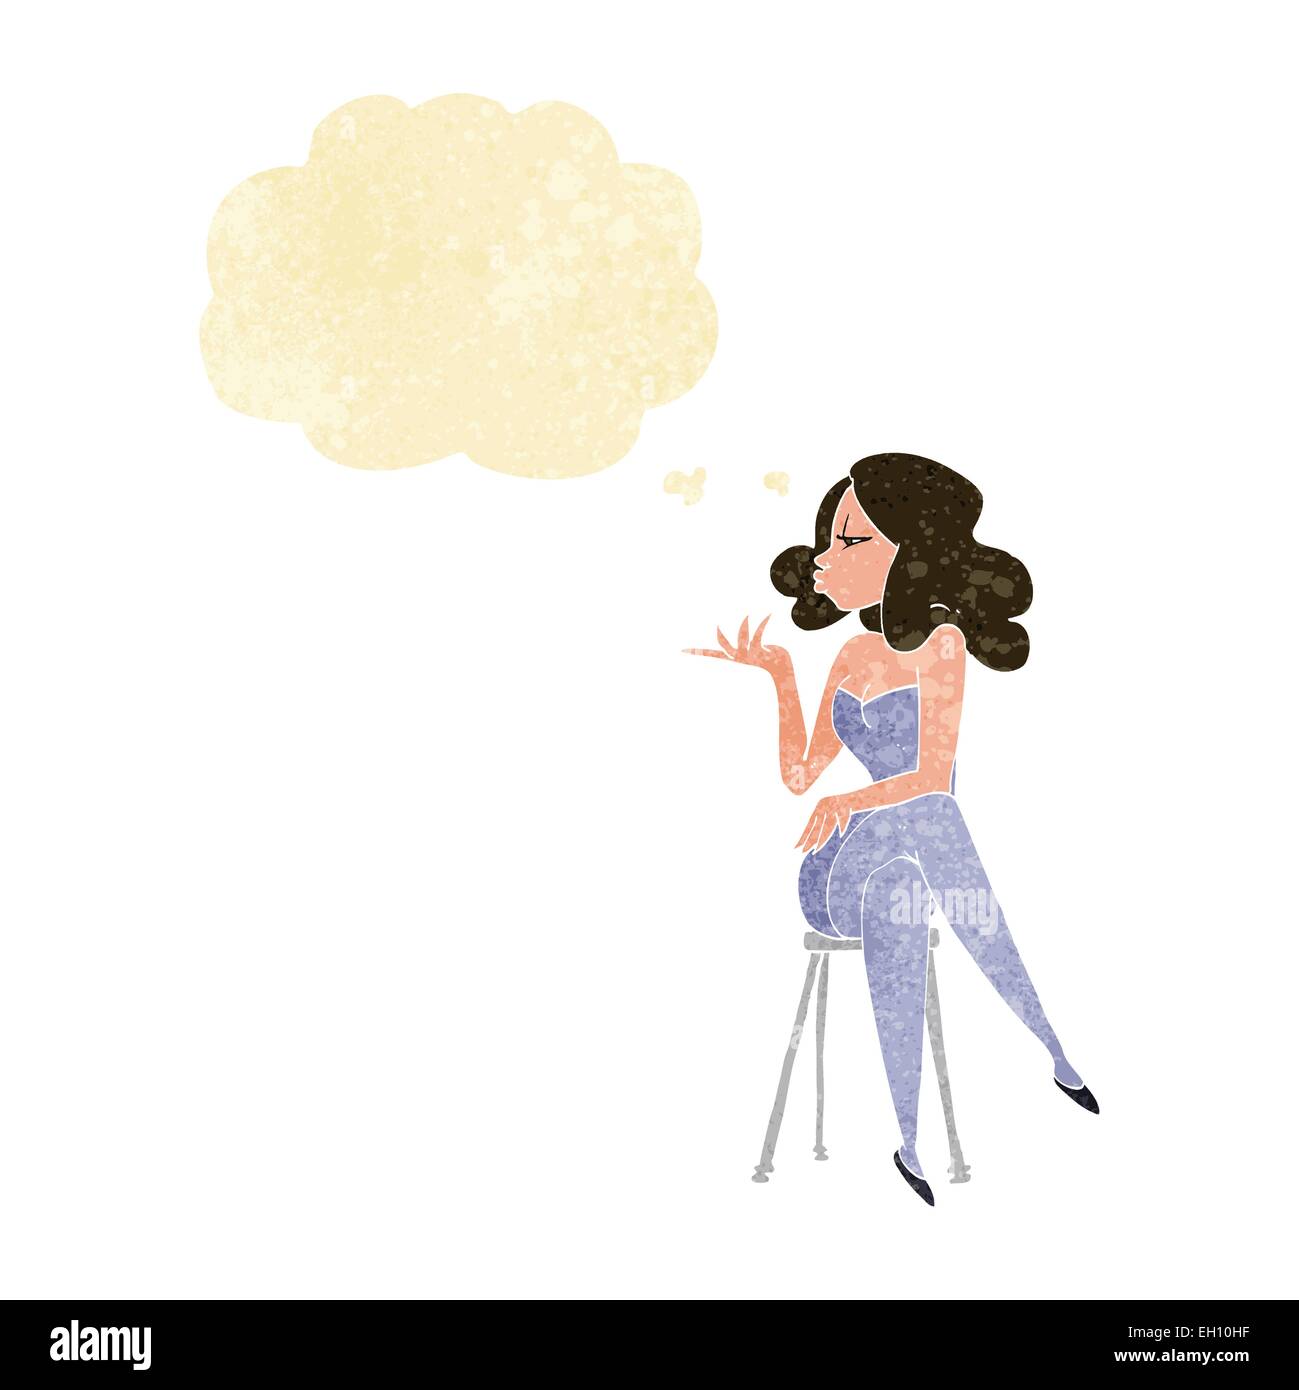 cartoon woman sitting on bar stool with thought bubble Stock Vector